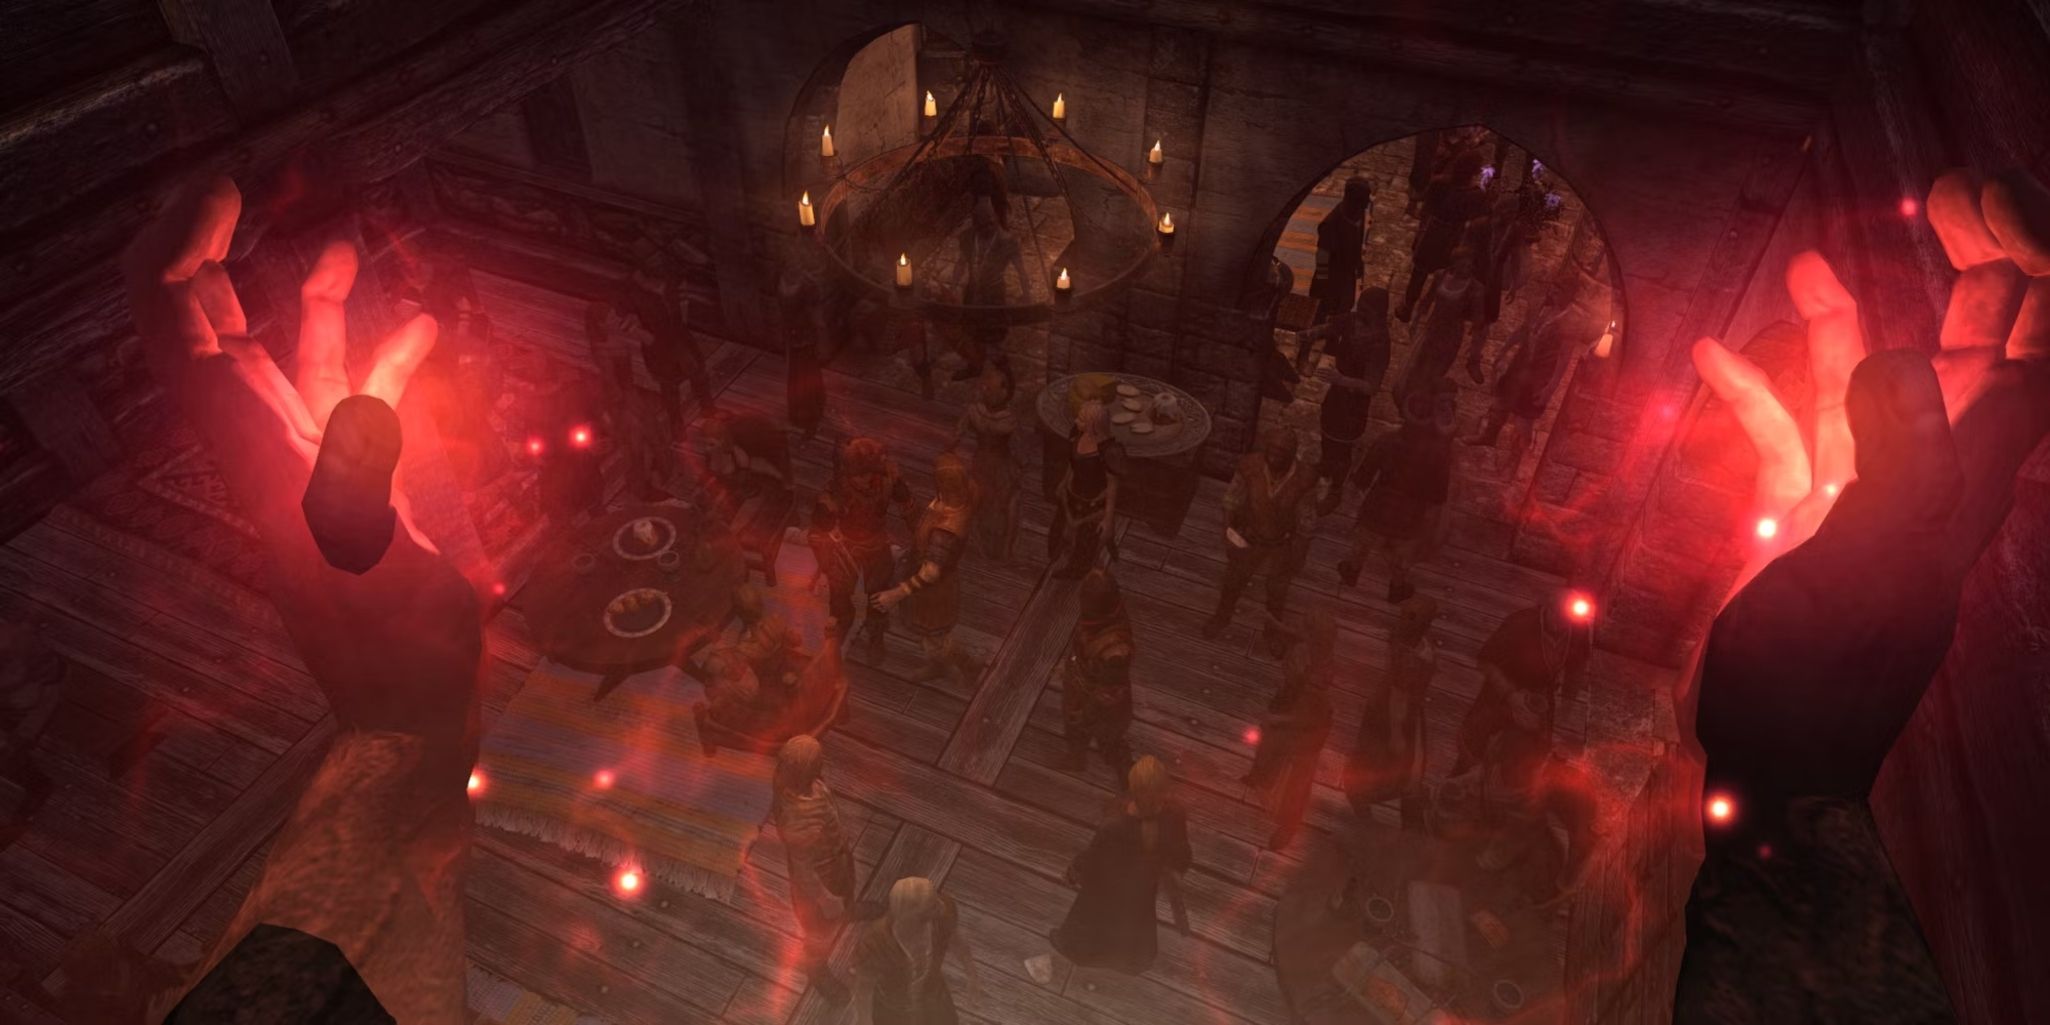 A player casting a red aura spell in front of a group of people inside a building.